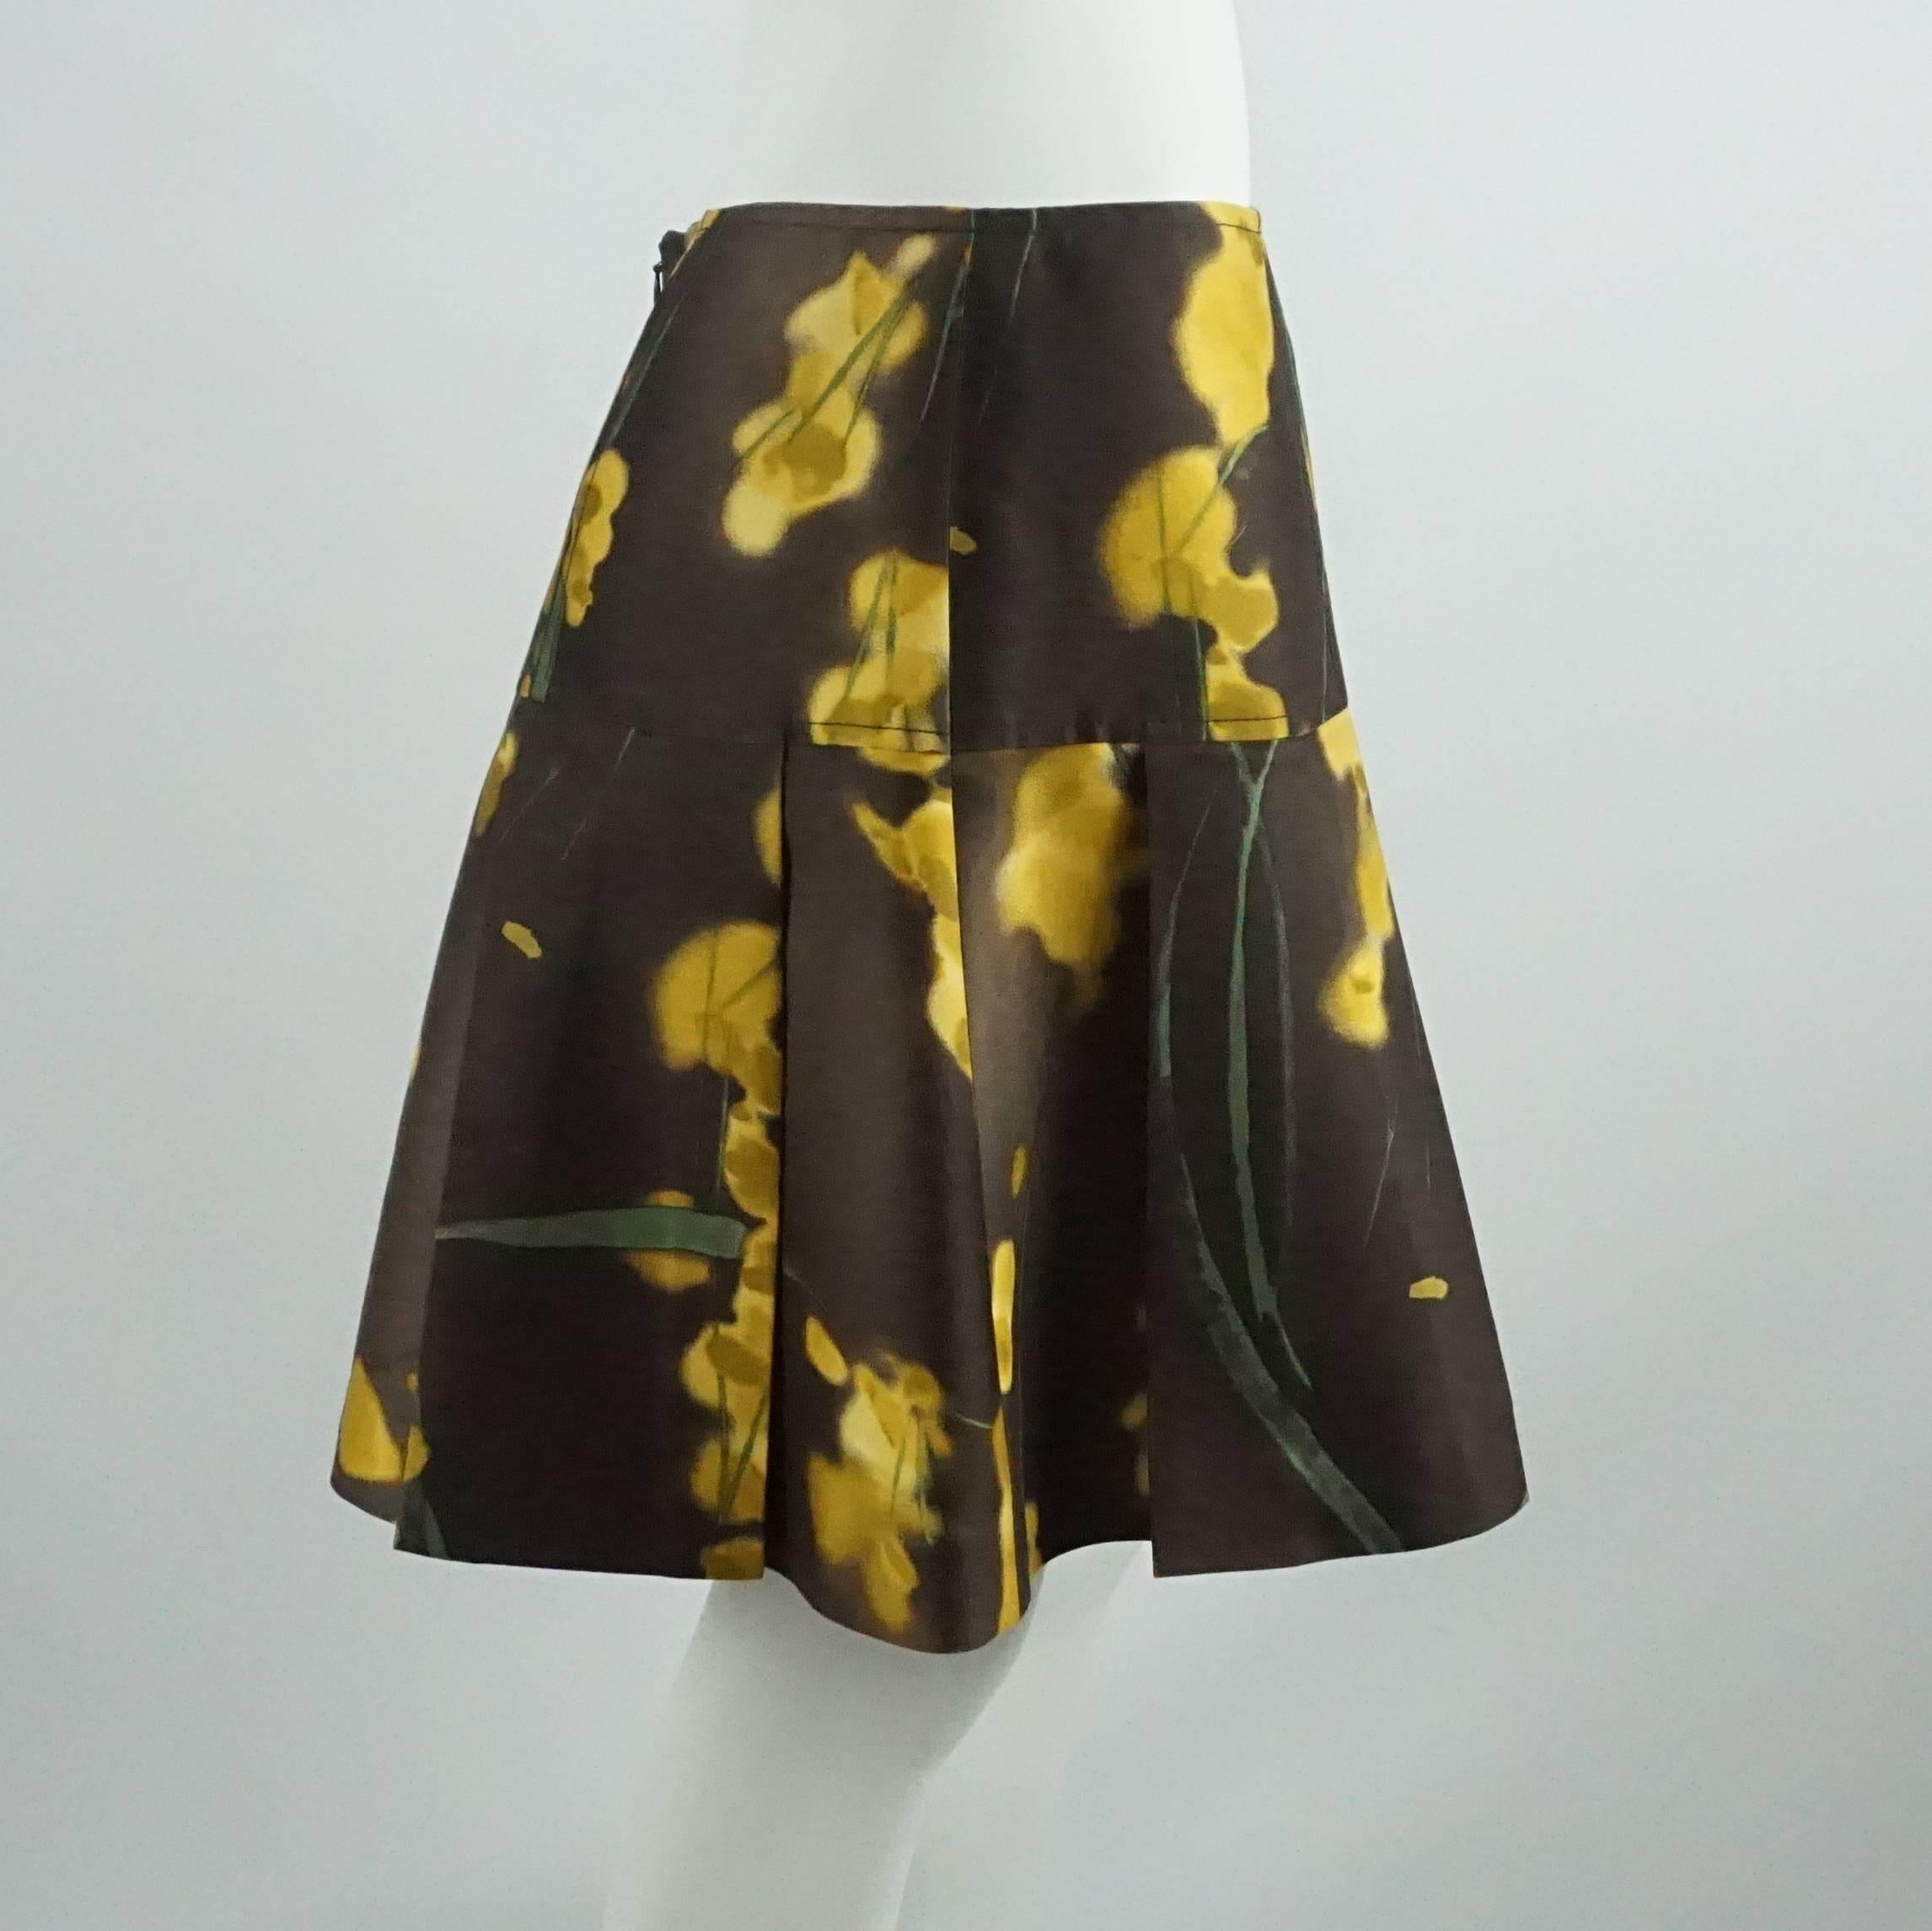 This Oscar de la Renta skirt is brown silk and has some pleating. It has a floral design of yellow and green. This skirt is in excellent condition.

Measurements
Waist: 32